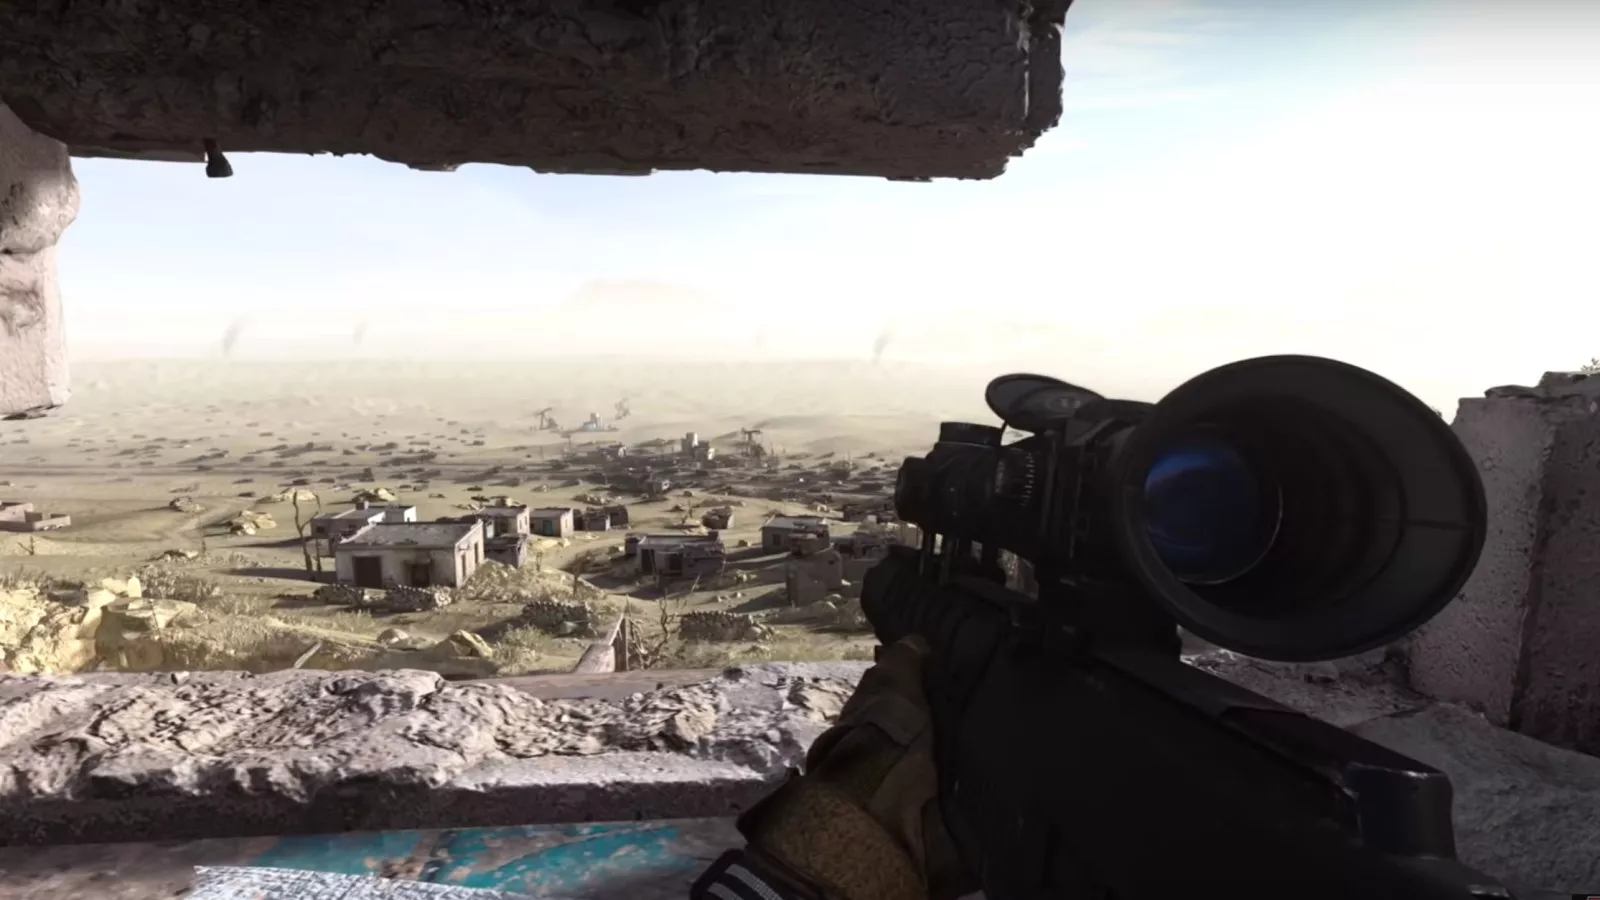 Call of Duty: Modern Warfare rewrites a controversial U.S. attack to blame  it on Russia